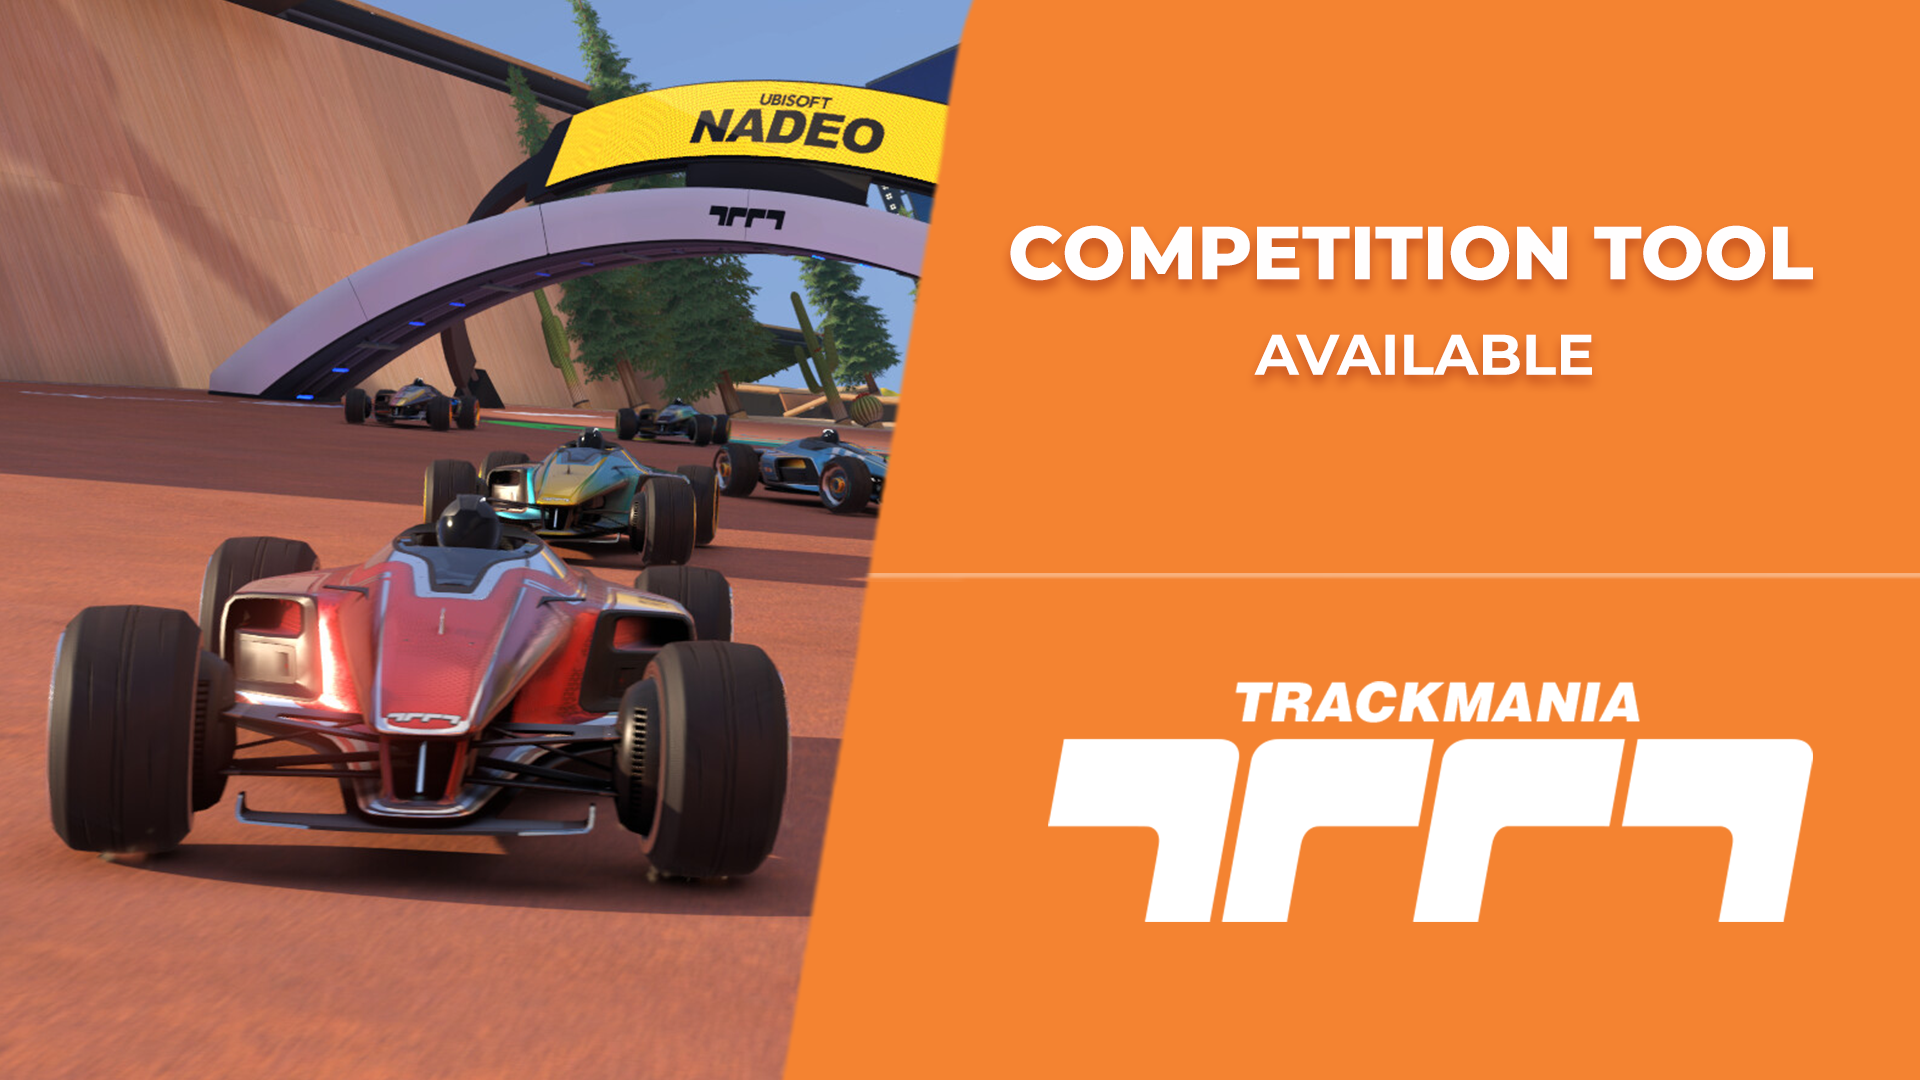 Competition tool and the highlighting of your event in Trackmania!